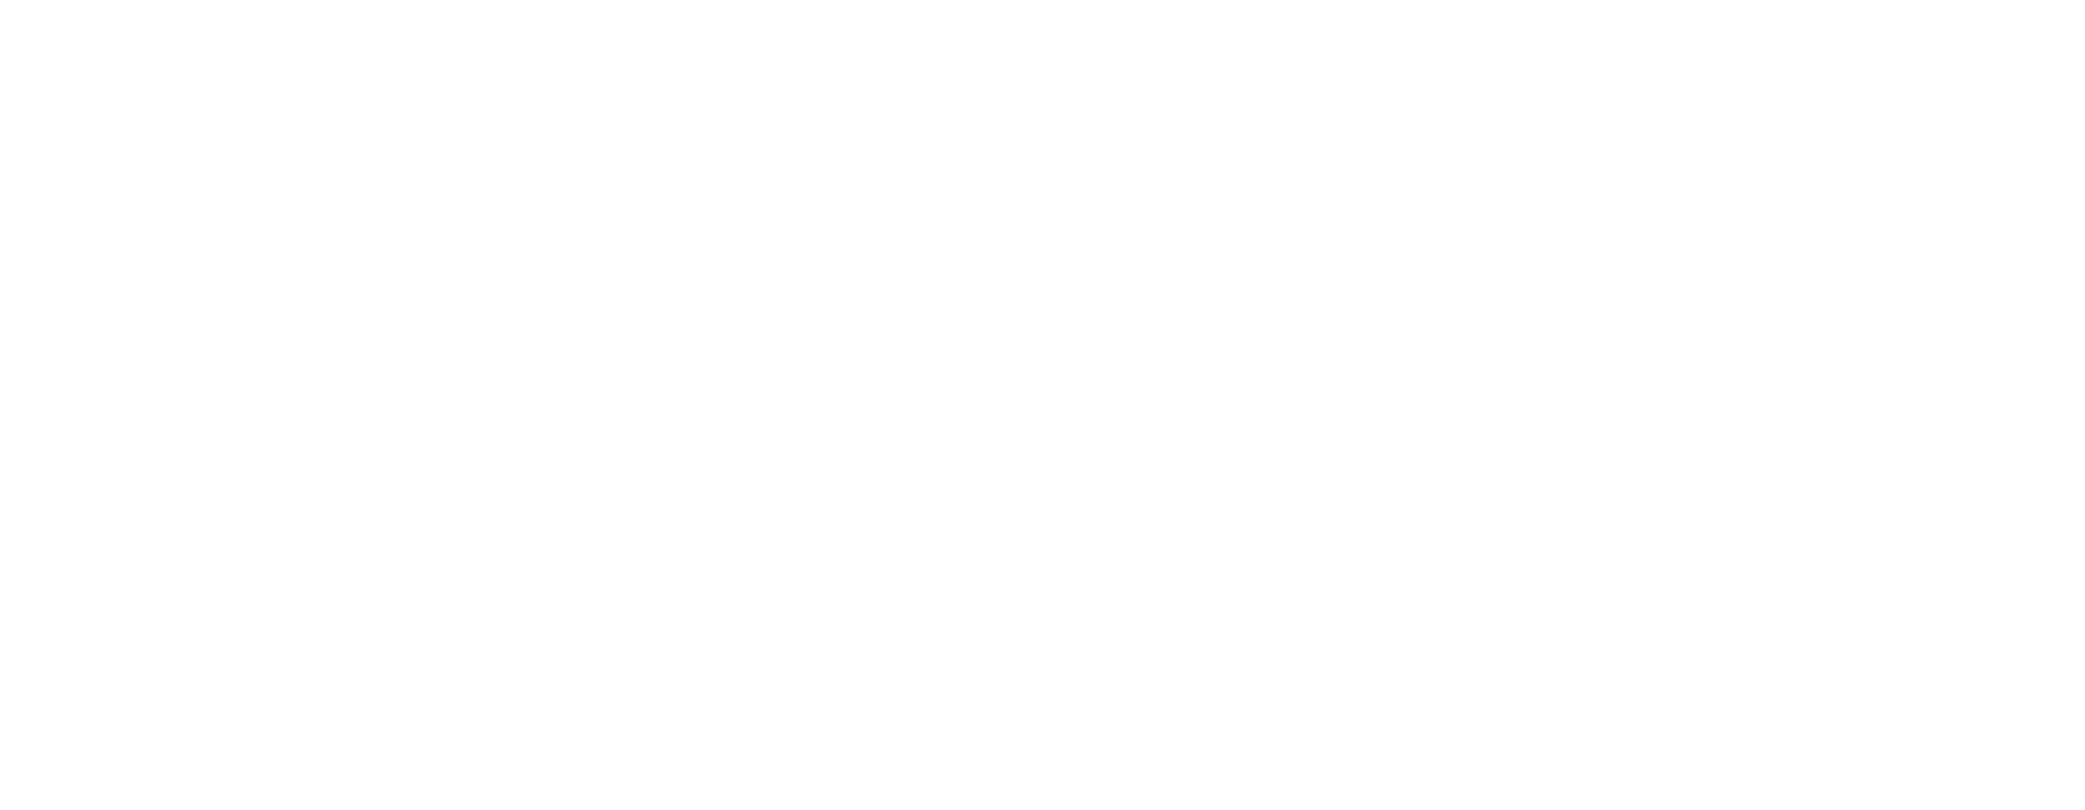 Powered by Fullstack Academy